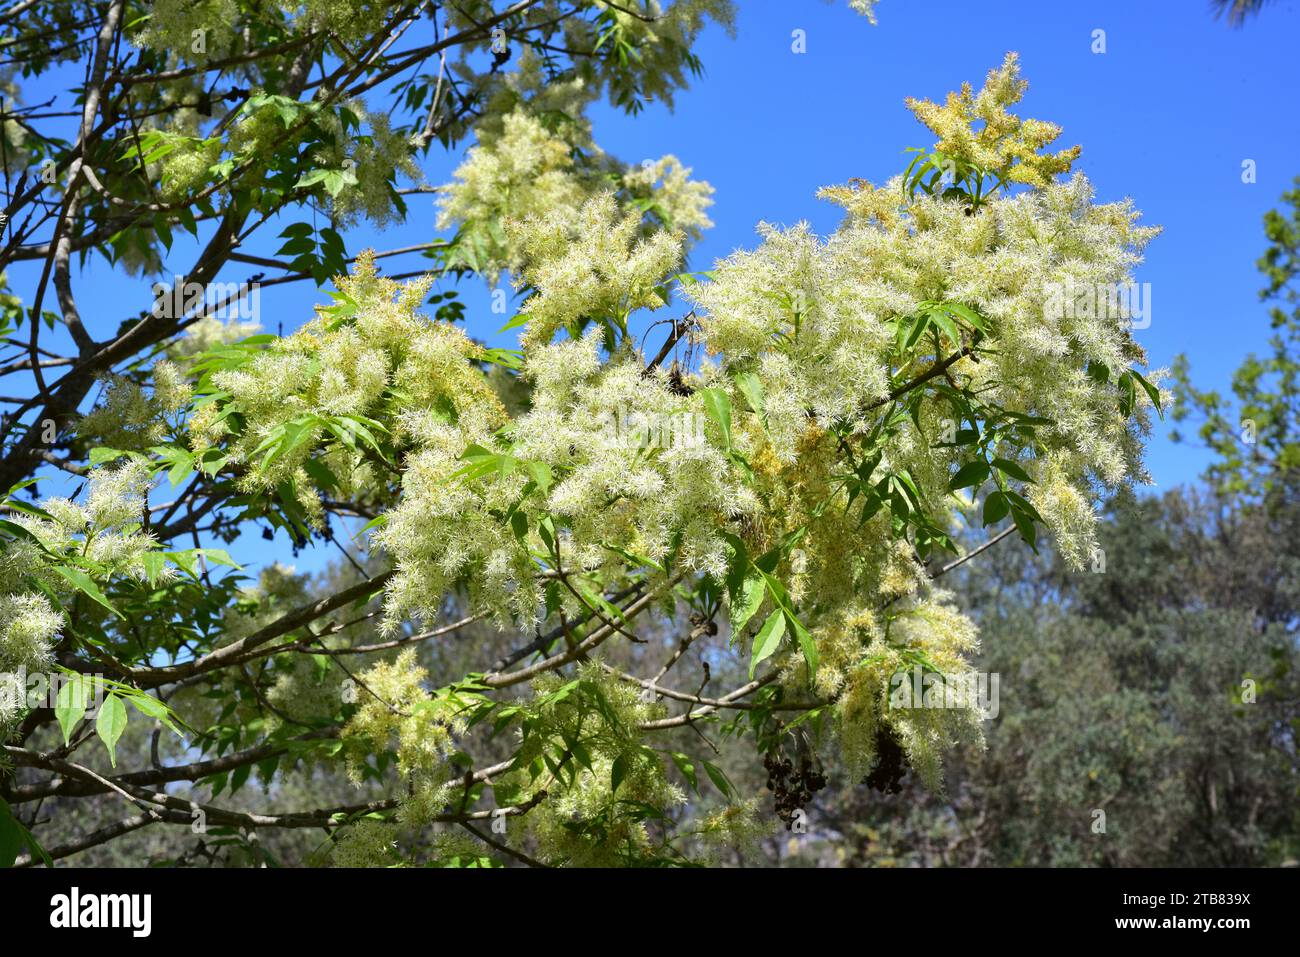 Manna ash (Fraxinus ornus) is a deciduous tree native to south Europe and southwest Asia. Inflorescences and leaves detail. Stock Photo